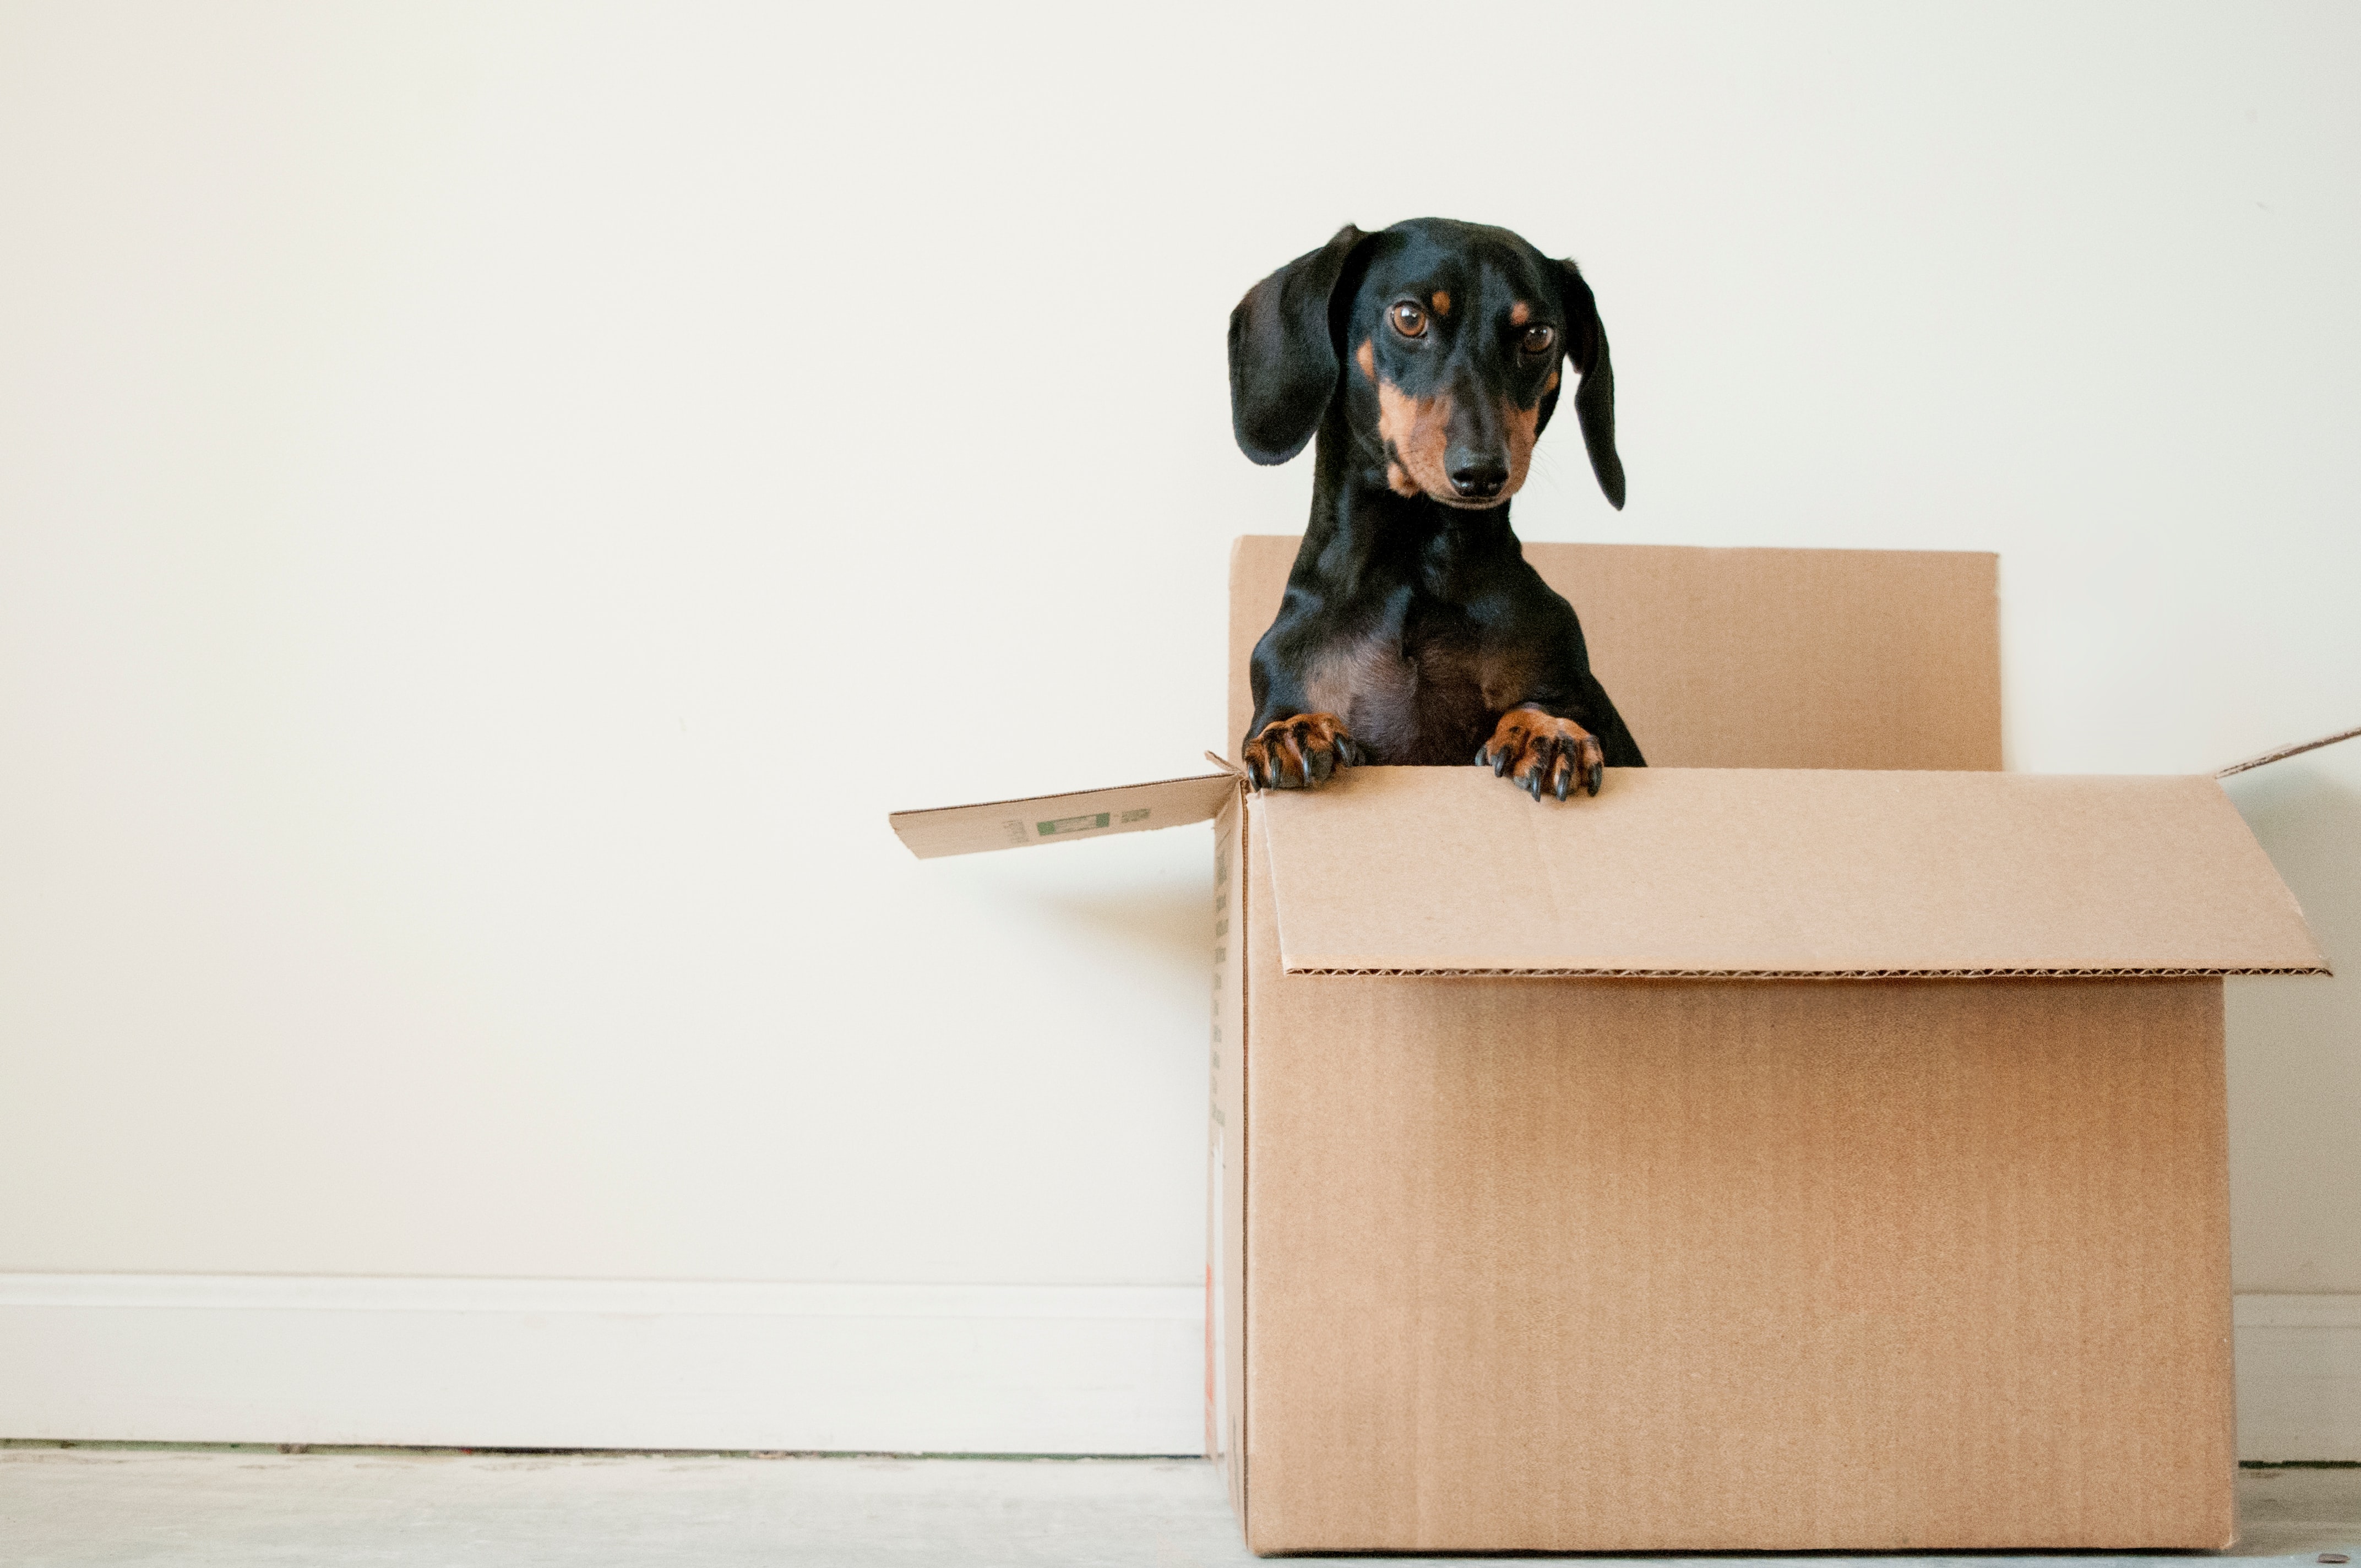 A black and brown dachshund sitting in a moving box on the floor of an interior unit, with an expectant look, their front paws on the opening of the box.